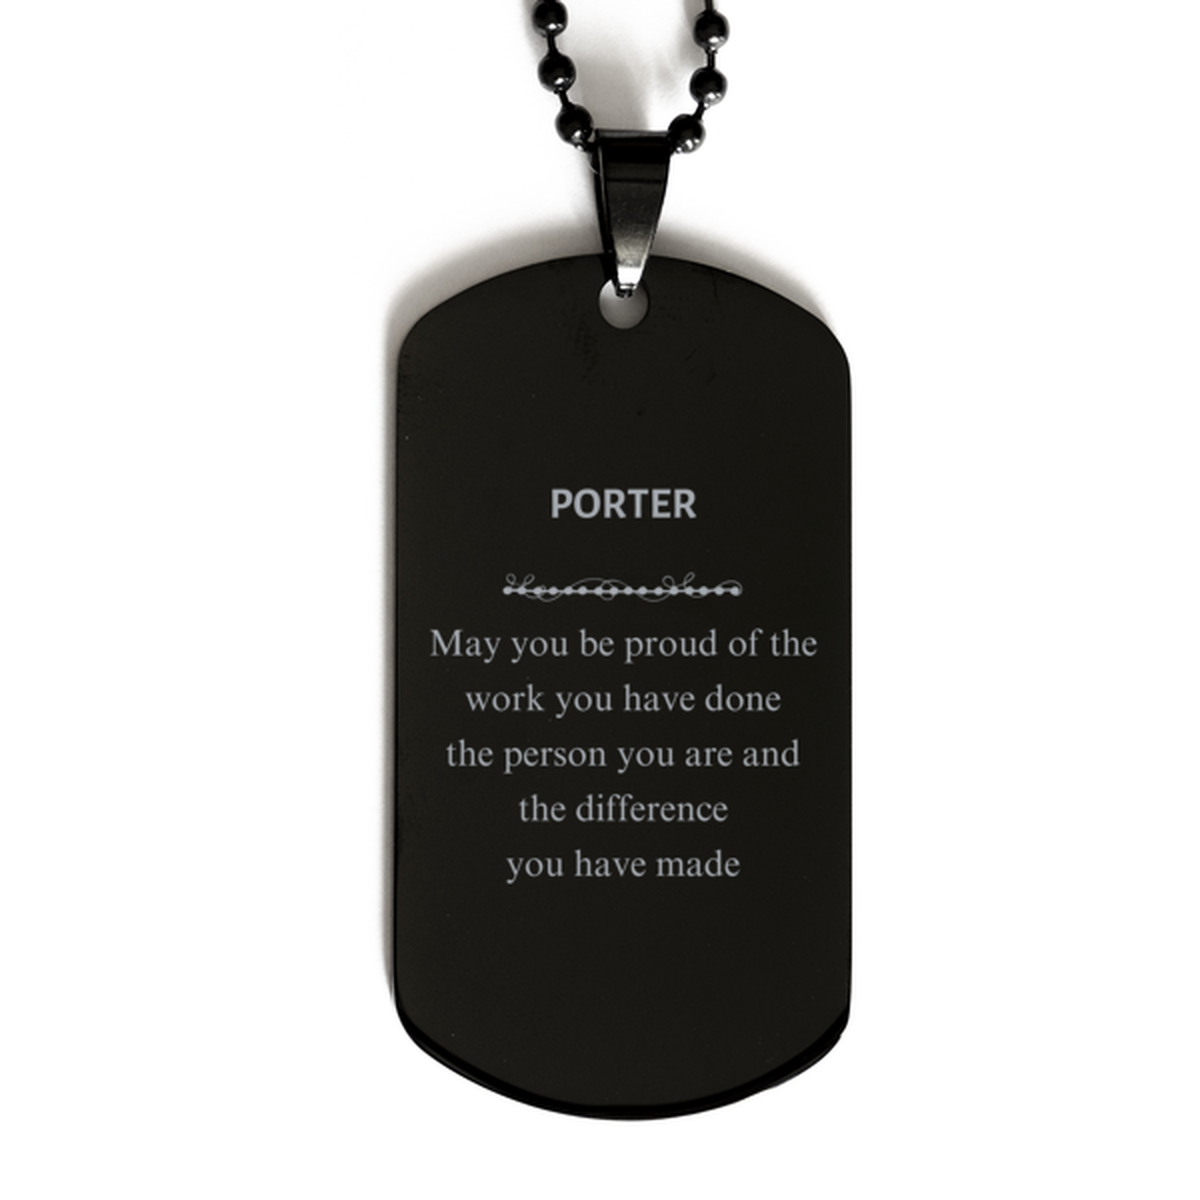 Porter May you be proud of the work you have done, Retirement Porter Black Dog Tag for Colleague Appreciation Gifts Amazing for Porter